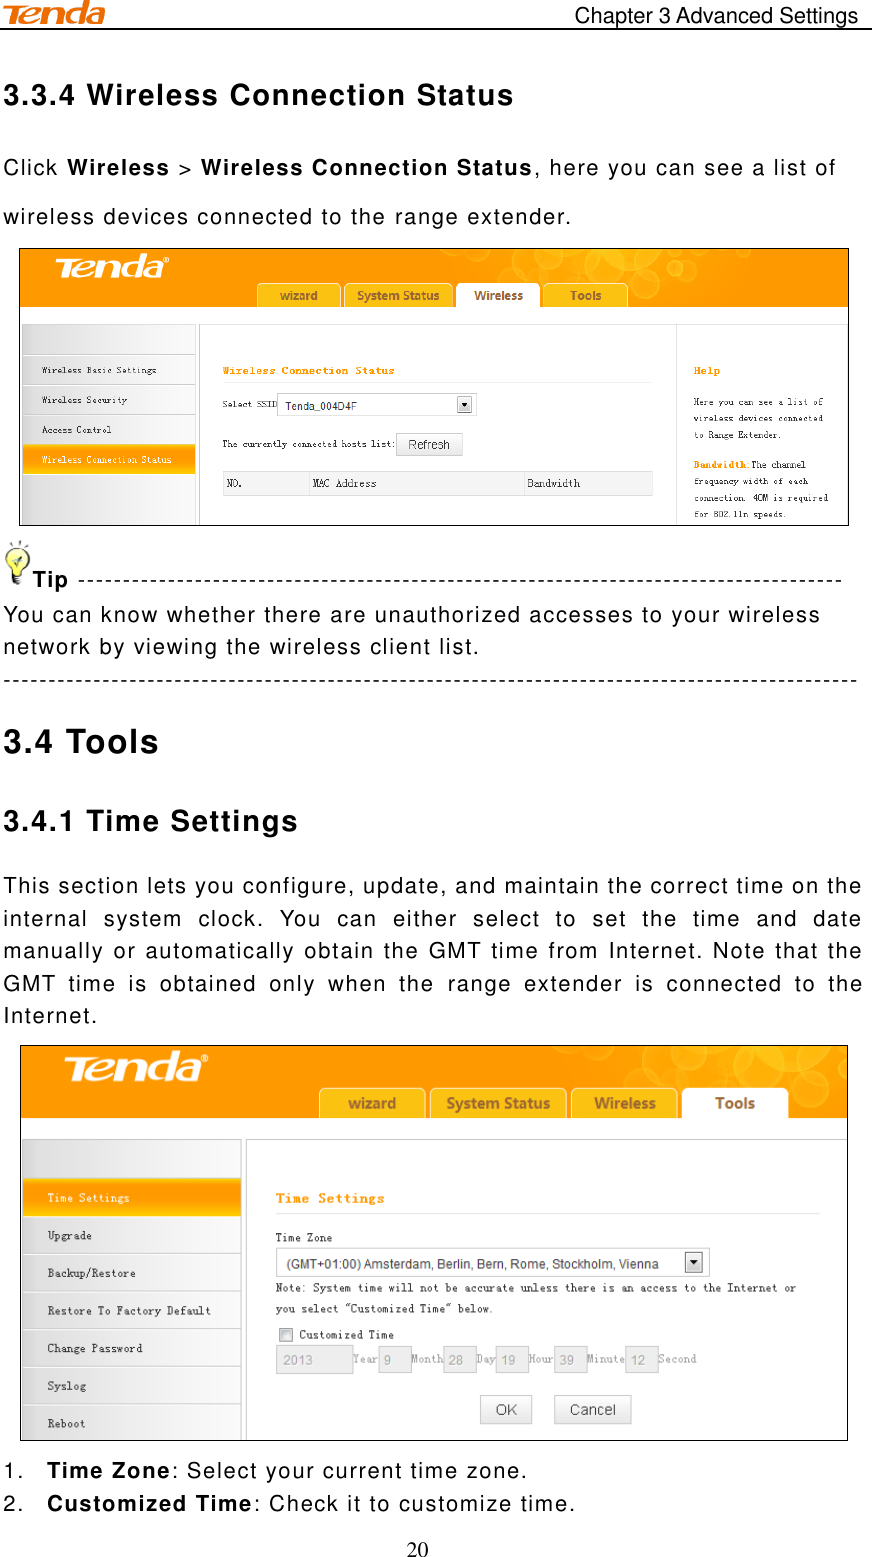                                                                                       Chapter 3 Advanced Settings 20 3.3.4 Wireless Connection Status Click Wireless &gt; Wireless Connection Status, here you can see a list of wireless devices connected to the range extender.  Tip ------------------------------------------------------------------------------------- You can know whether there are unauthorized accesses to your wireless network by viewing the wireless client list. ----------------------------------------------------------------------------------------------- 3.4 Tools 3.4.1 Time Settings This section lets you configure, update, and maintain the correct time on the internal  system  clock.  You  can  either  select  to  set  the  time  and  date manually or automatically obtain the GMT  time from Internet. Note that the GMT  time  is  obtained  only  when  the  range  extender  is  connected  to  the Internet.  1. Time Zone: Select your current time zone. 2. Customized Time: Check it to customize time. 